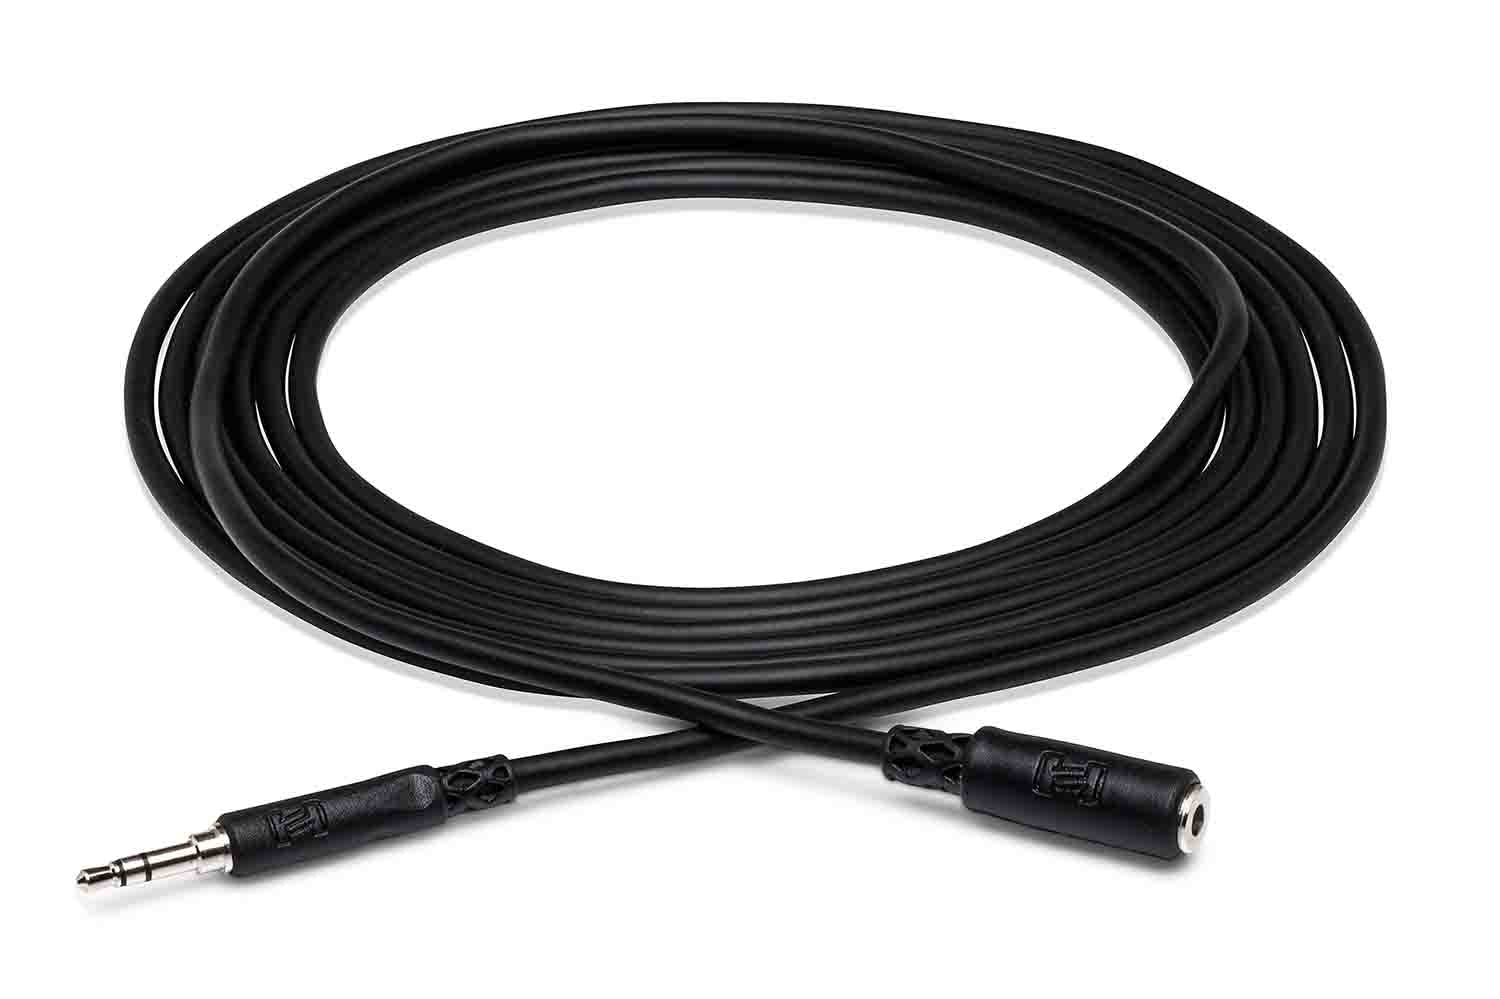 Hosa MHE-105, 3.5mm TRS Female to 3.5mm TRS Male Extension Cable - 5 Feet - Hollywood DJ